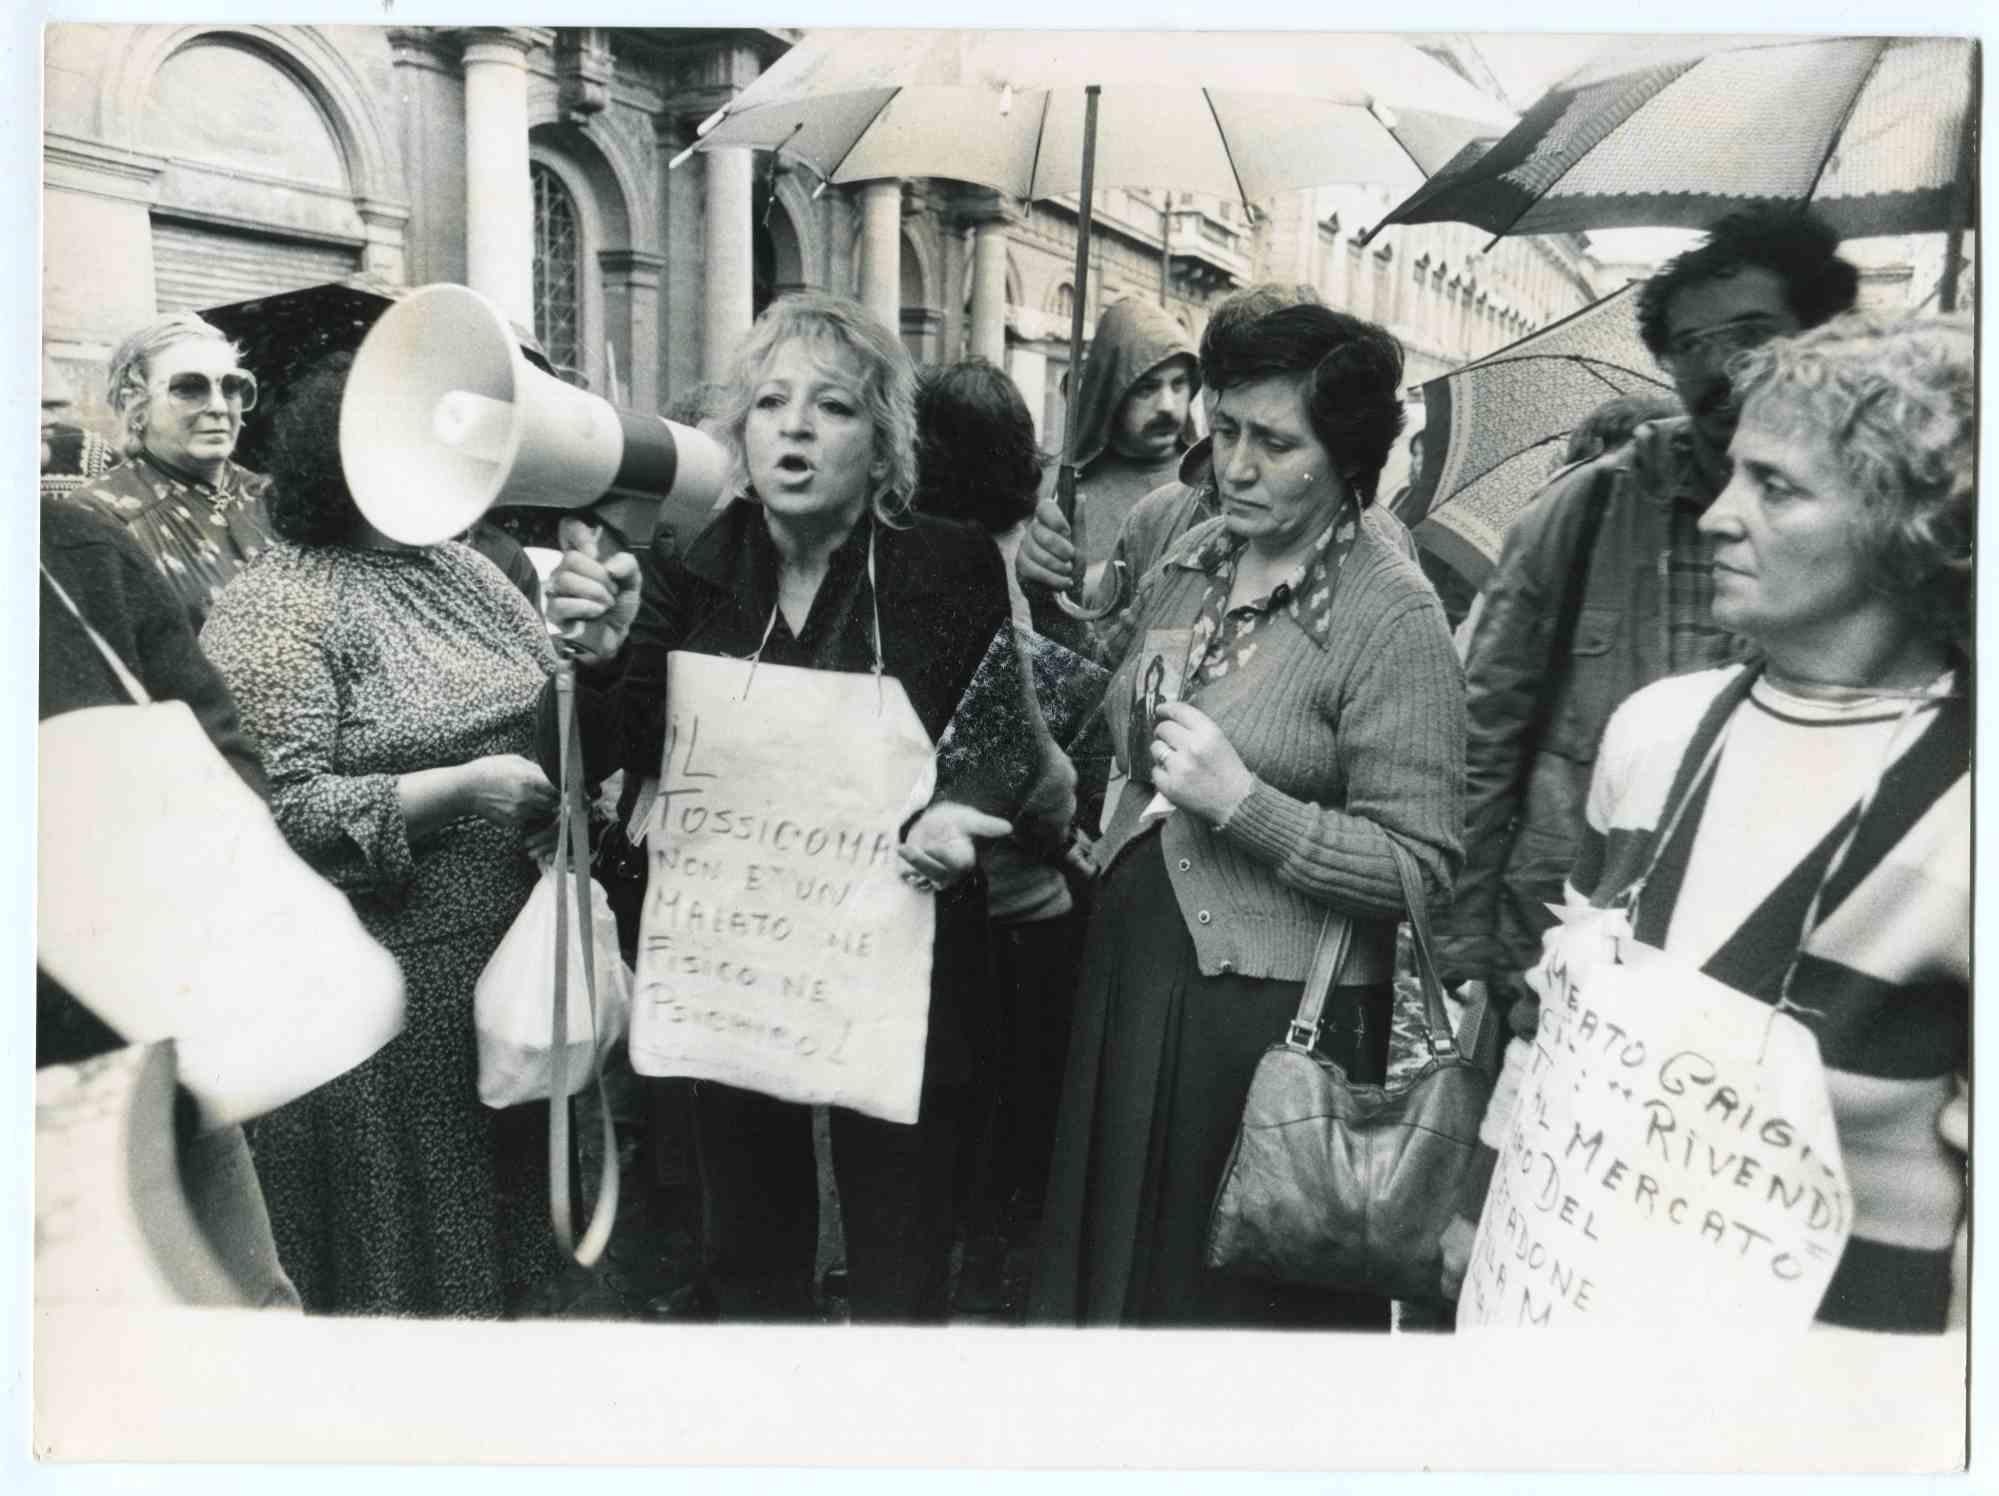 Unknown Black and White Photograph - The Protest - Historical Photograph About the Feminist Movement - 1980